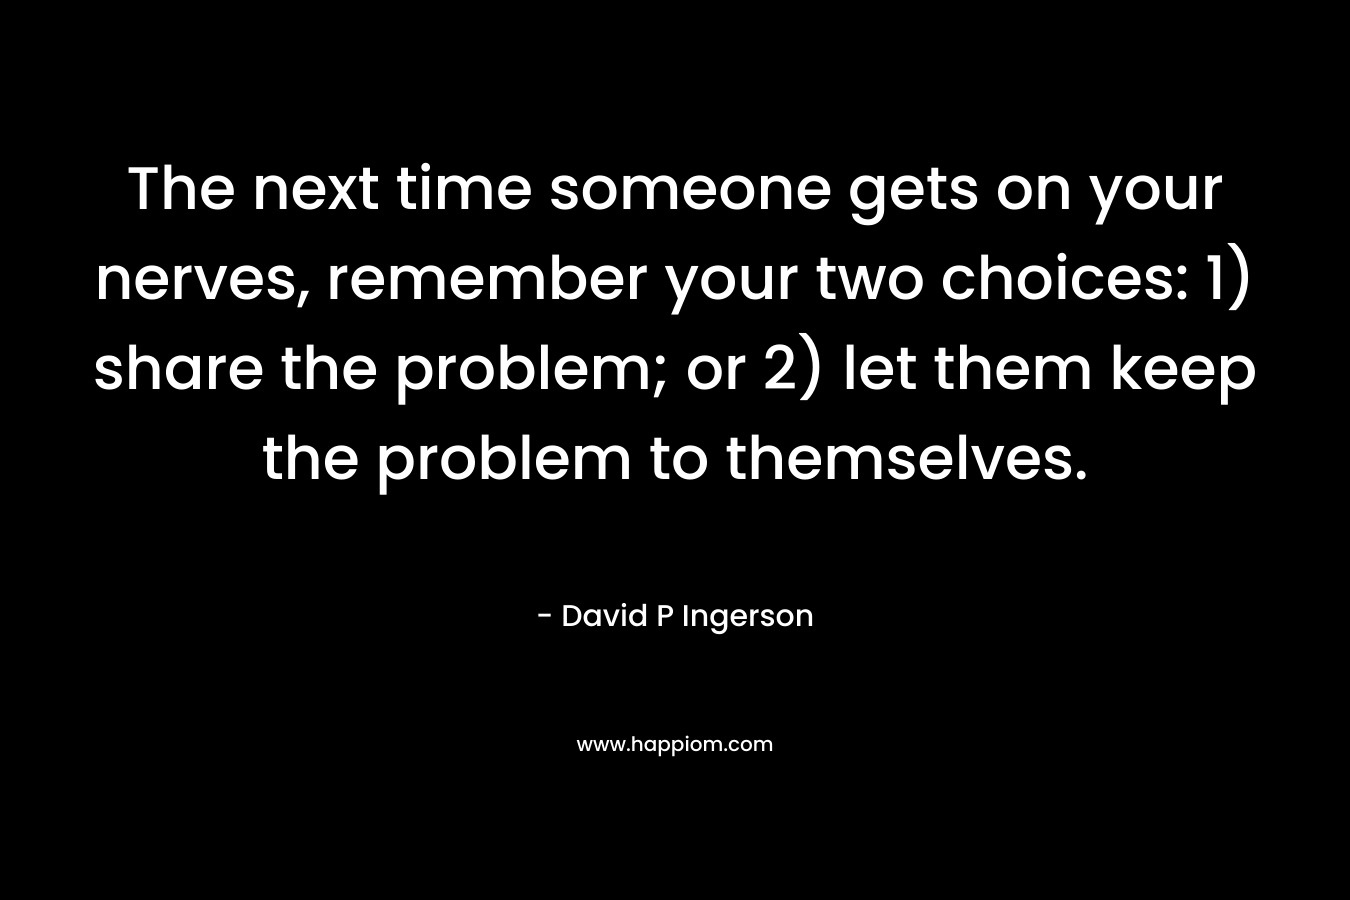 The next time someone gets on your nerves, remember your two choices: 1) share the problem; or 2) let them keep the problem to themselves. – David P Ingerson